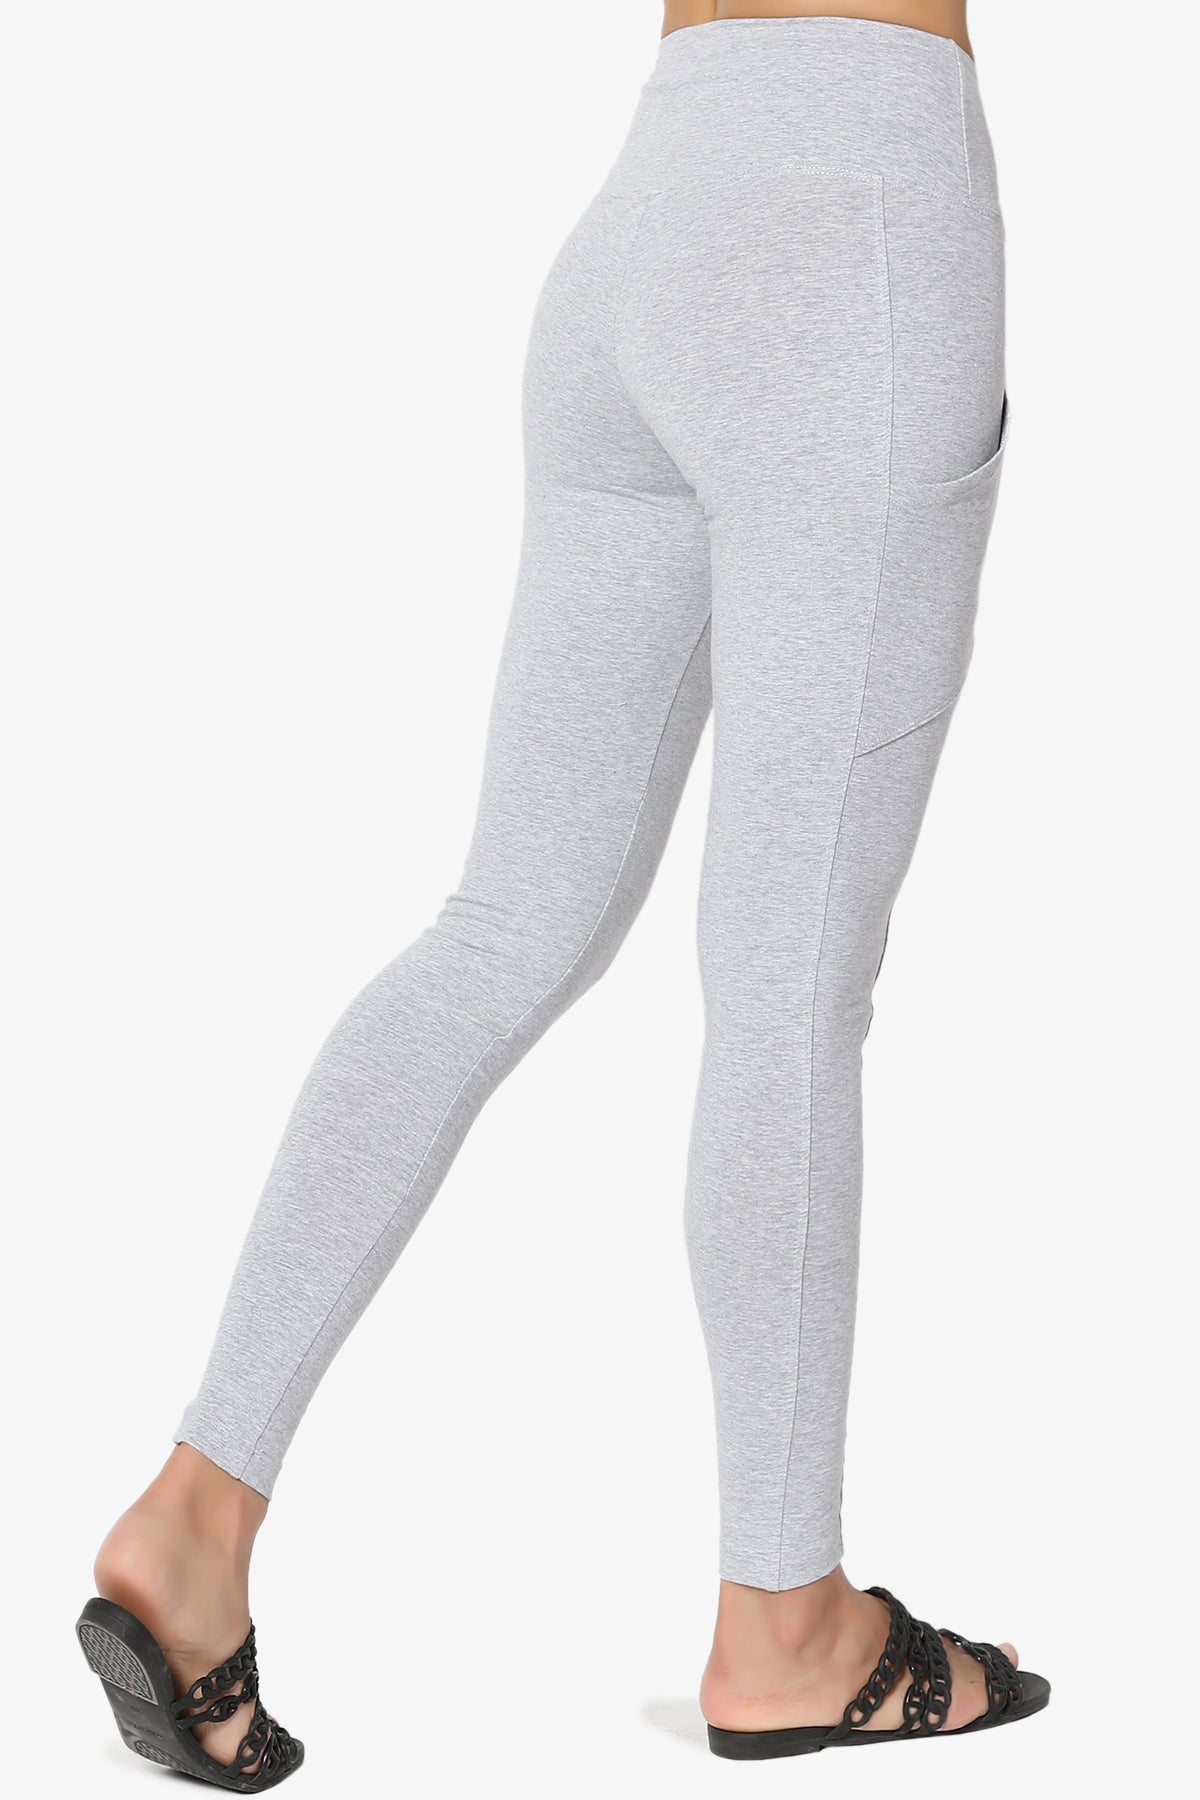 Ansley Luxe Cotton Leggings with Pockets HEATHER GREY_4